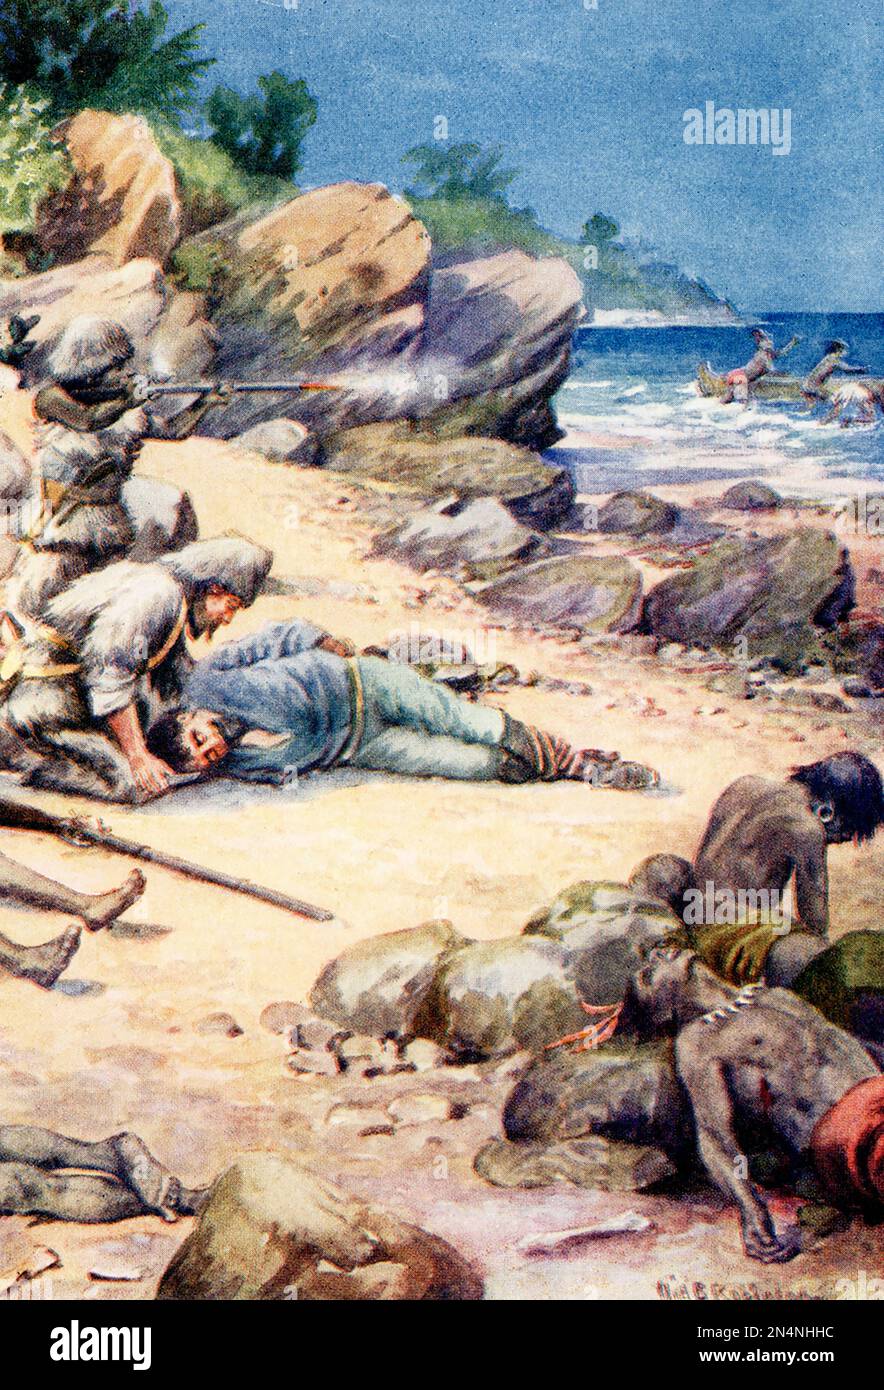 The 1917 caption reads: Robinson ran to the white prisoner and cut his bonds.” Robinson Crusoe is a novel written by the English novelist Daniel Defoe and published in 1719. A fictional autobiography,  it tells the tale of an English castaway named  Robinson Crusoe (here seen saving a man from a group of cannibals) who spent 28 years on a remote tropical island near Venezuela before he was rescued. Stock Photo